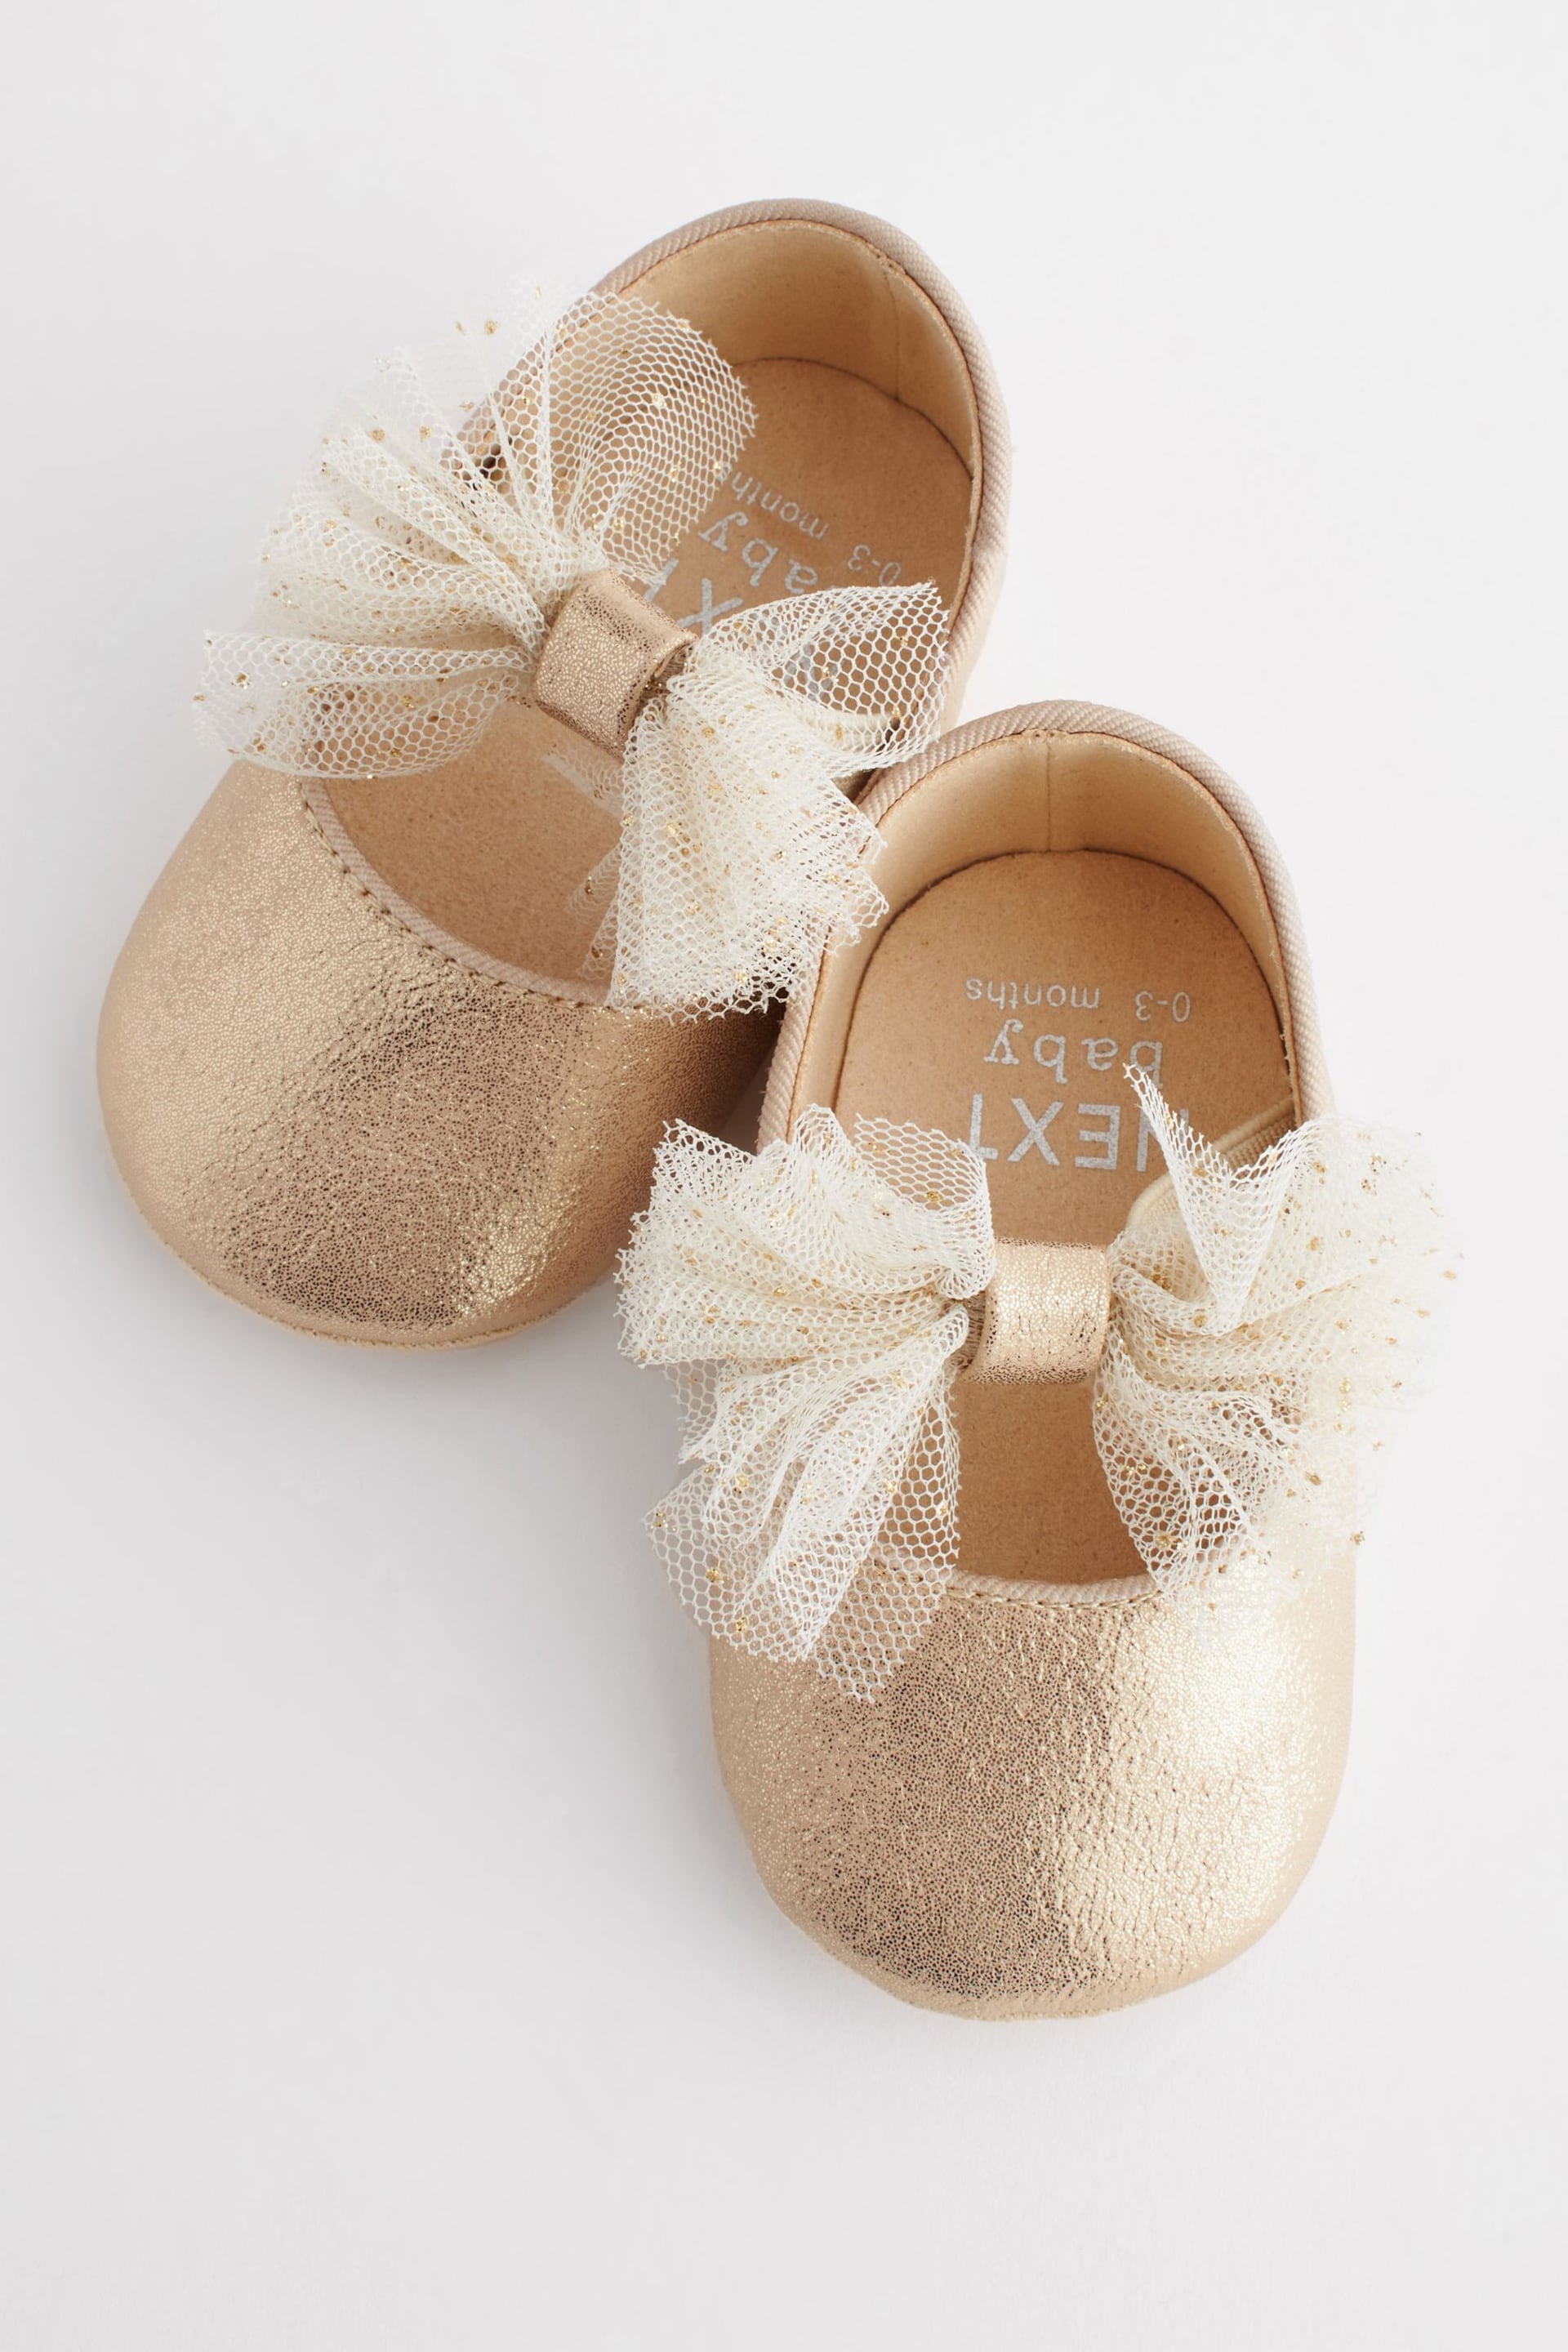 Gold Bow Ballet Occasion Baby Shoes (0-24mths) - Image 5 of 6